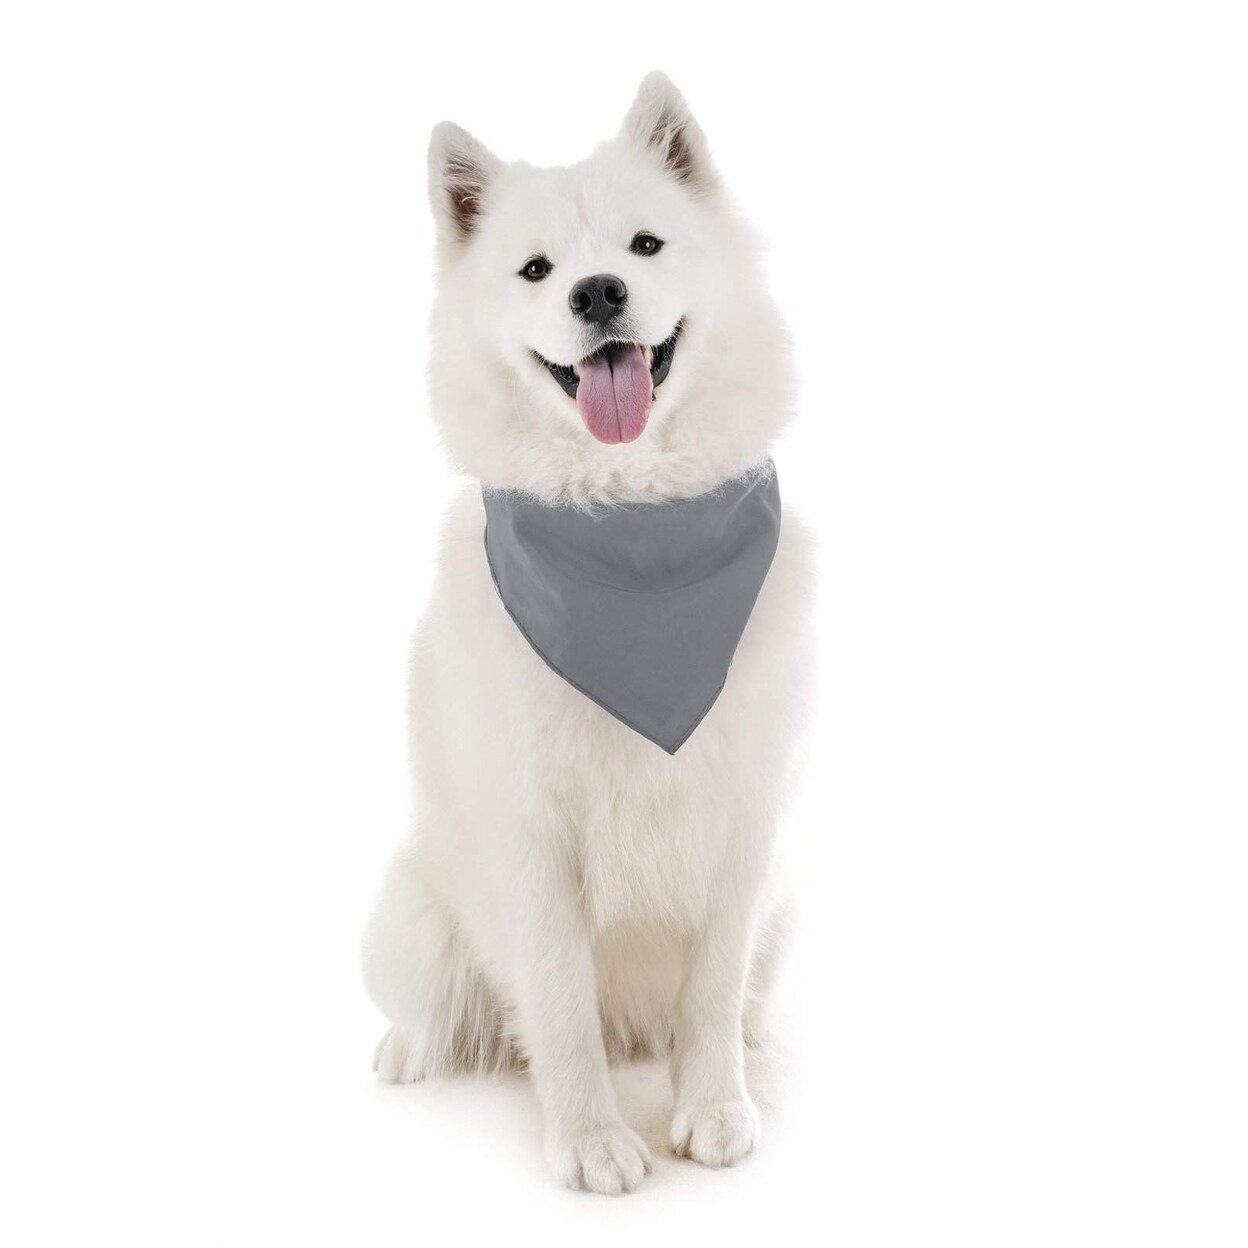 Jordefano Dog Cotton Bandanas - 4 Pack - Scarf Triangle Bibs for Small Medium and Large Puppies Dogs and Cats